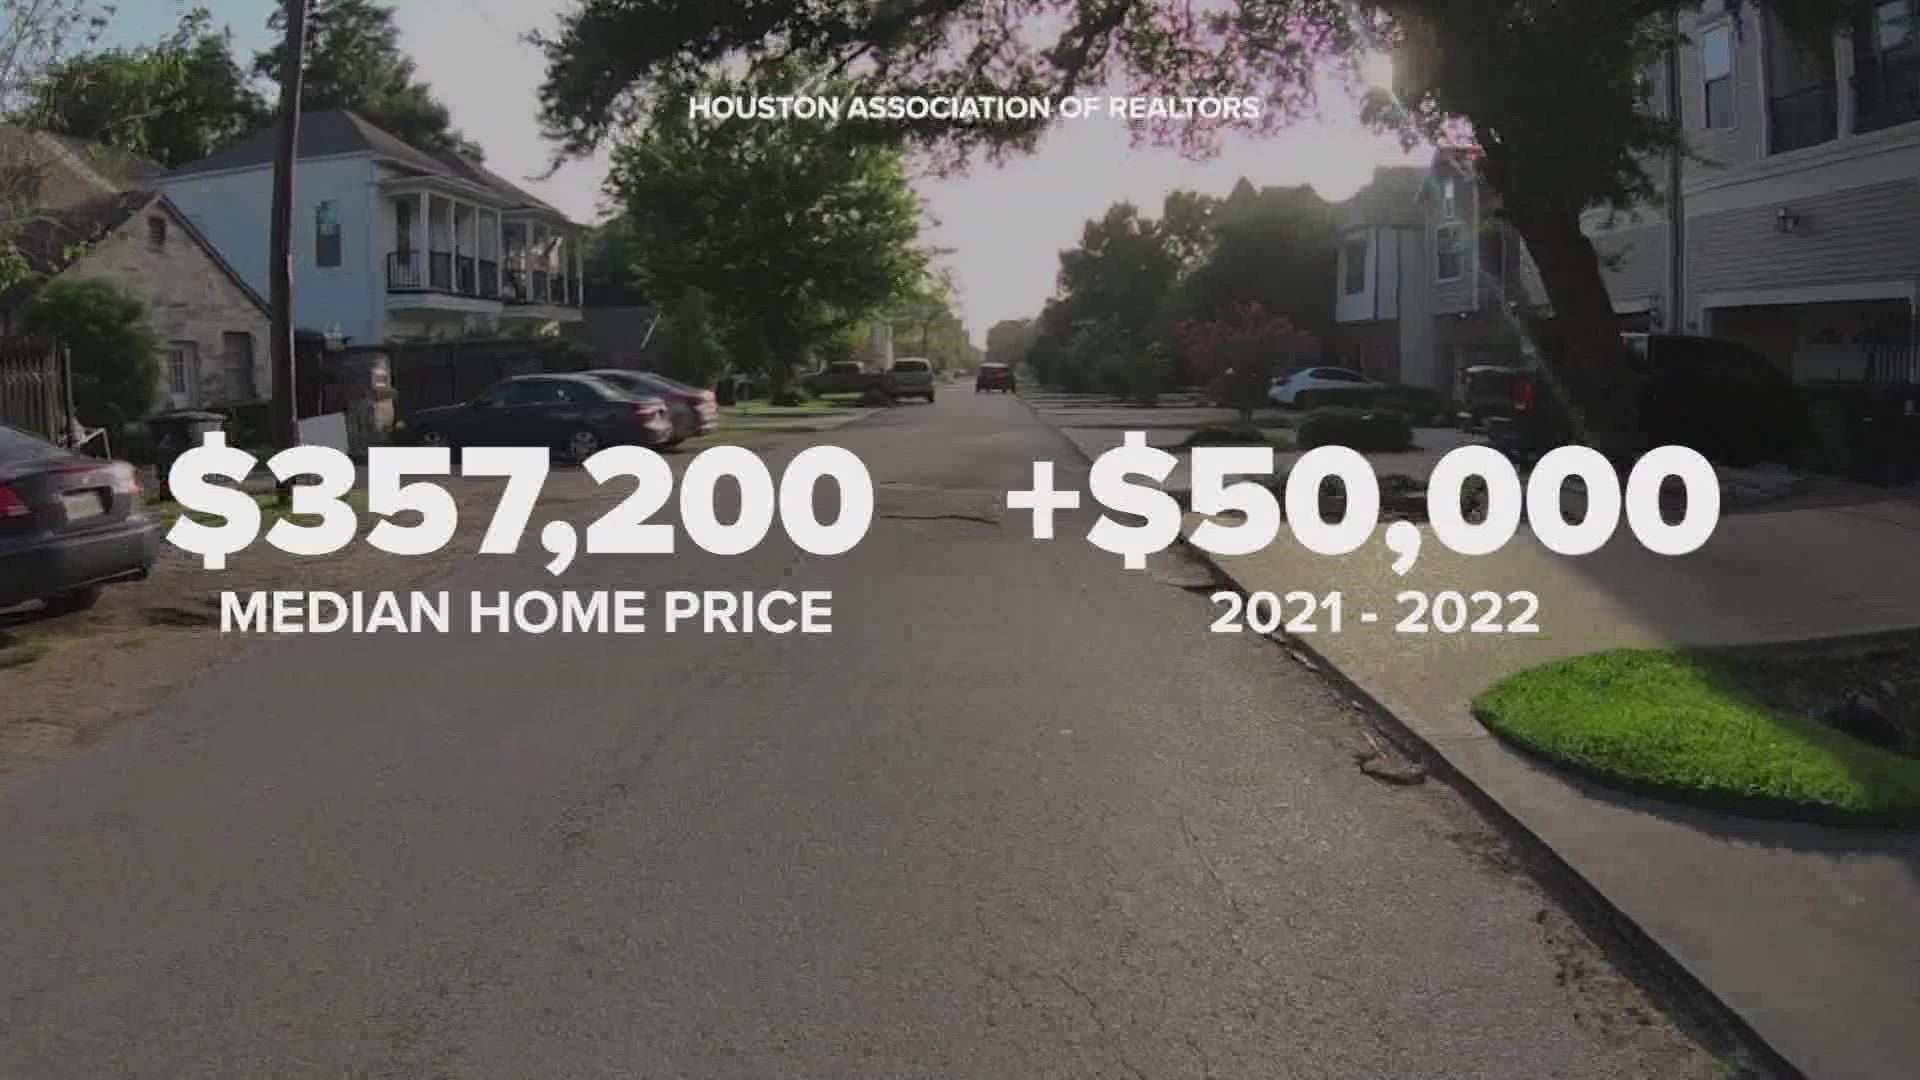 The current median home price in Houston is $357,200. That’s a $50,000 increase year over year.